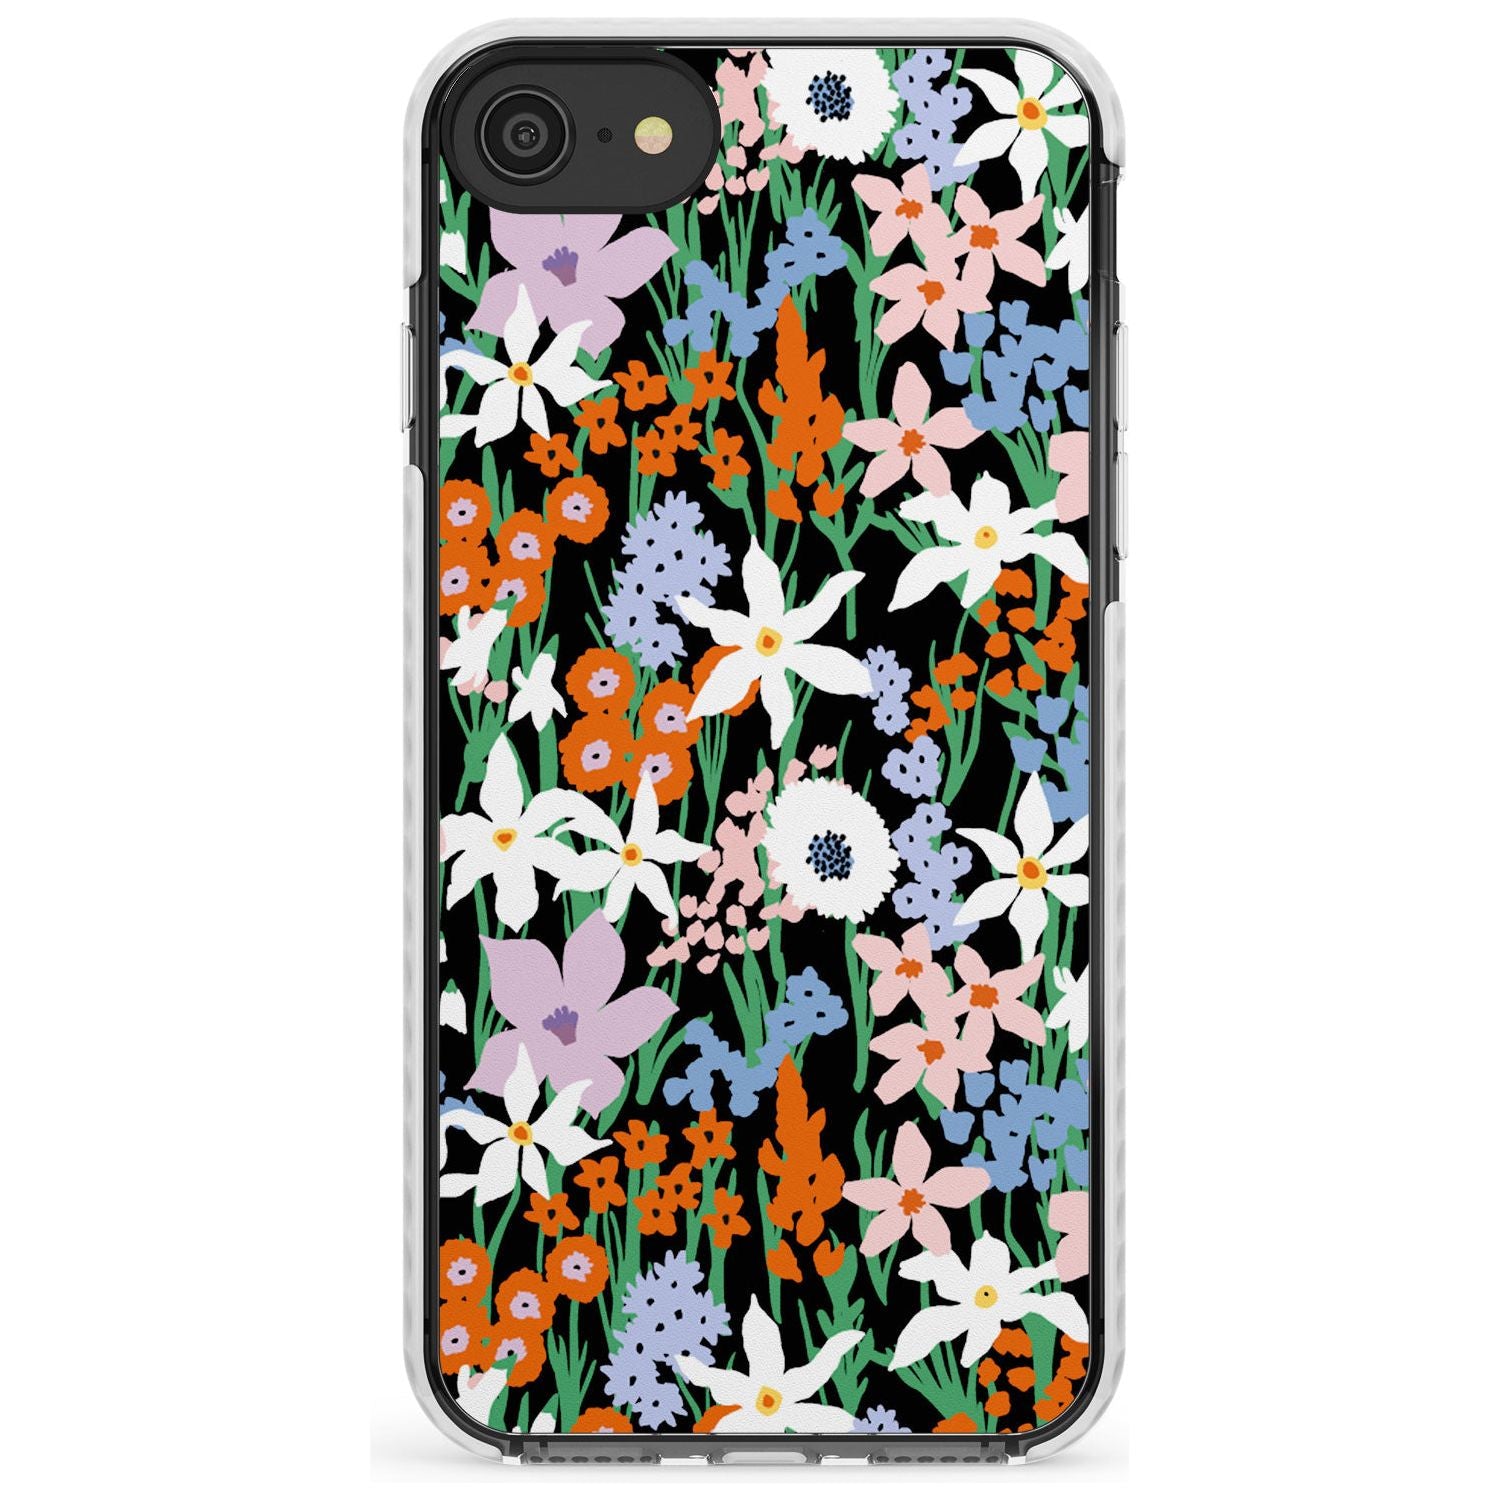 Springtime Meadow: Solid Slim TPU Phone Case for iPhone SE 8 7 Plus